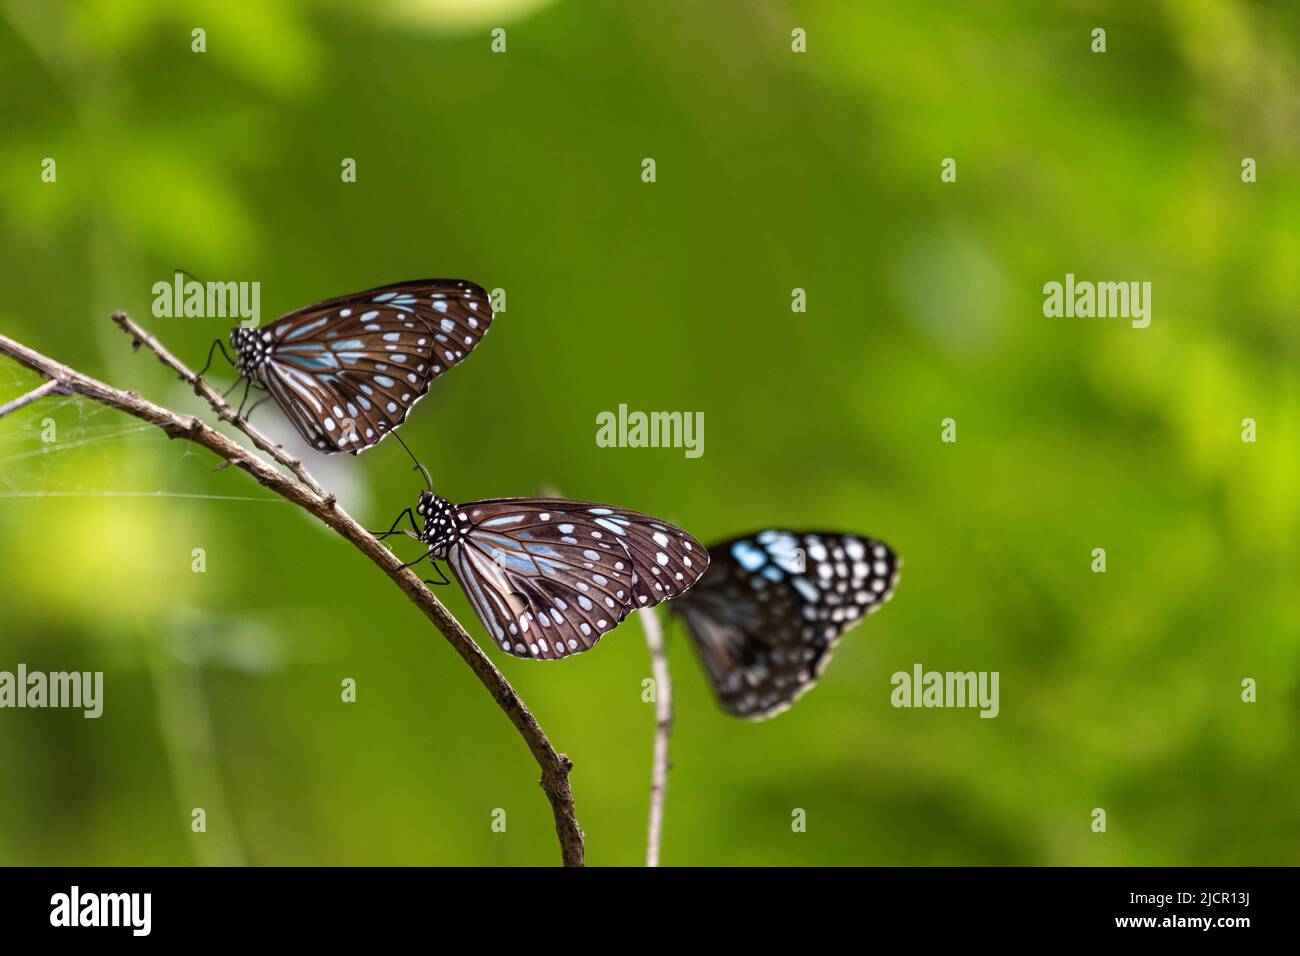 Blue Tiger Butterflies sit on a twig, on a green background. Currumbin Wildlife Sanctuary, Queensland, Australia Stock Photo